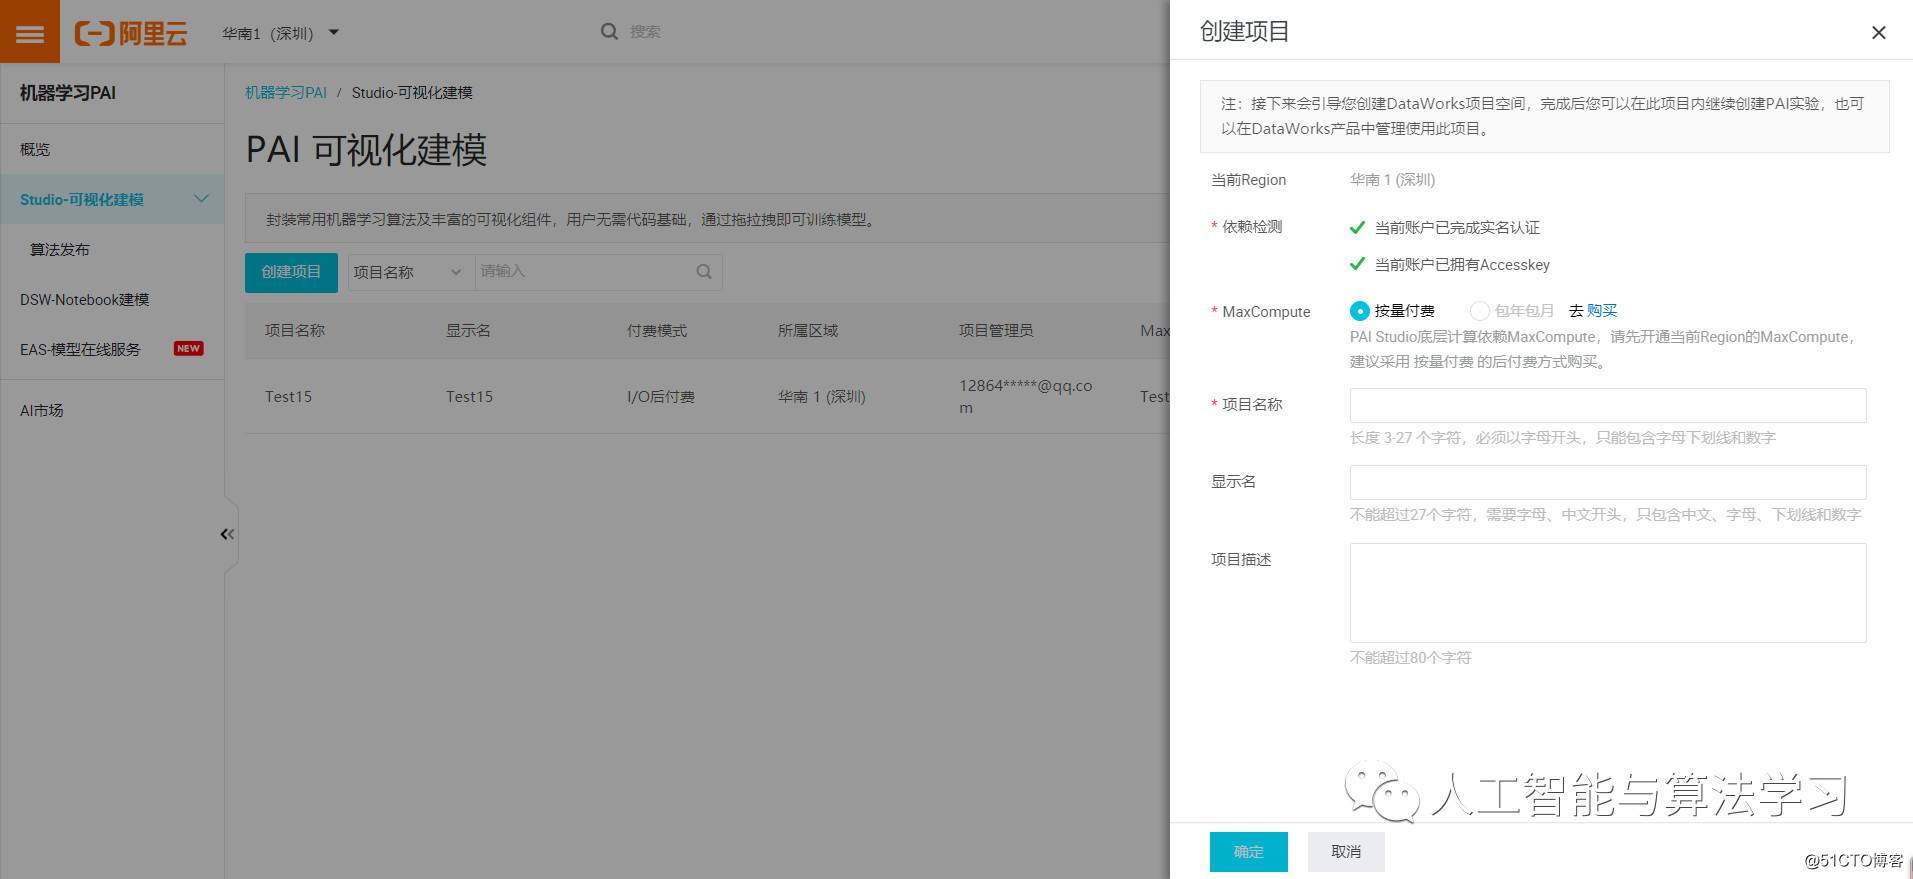 Introduction to Alibaba Cloud Machine Learning PAI